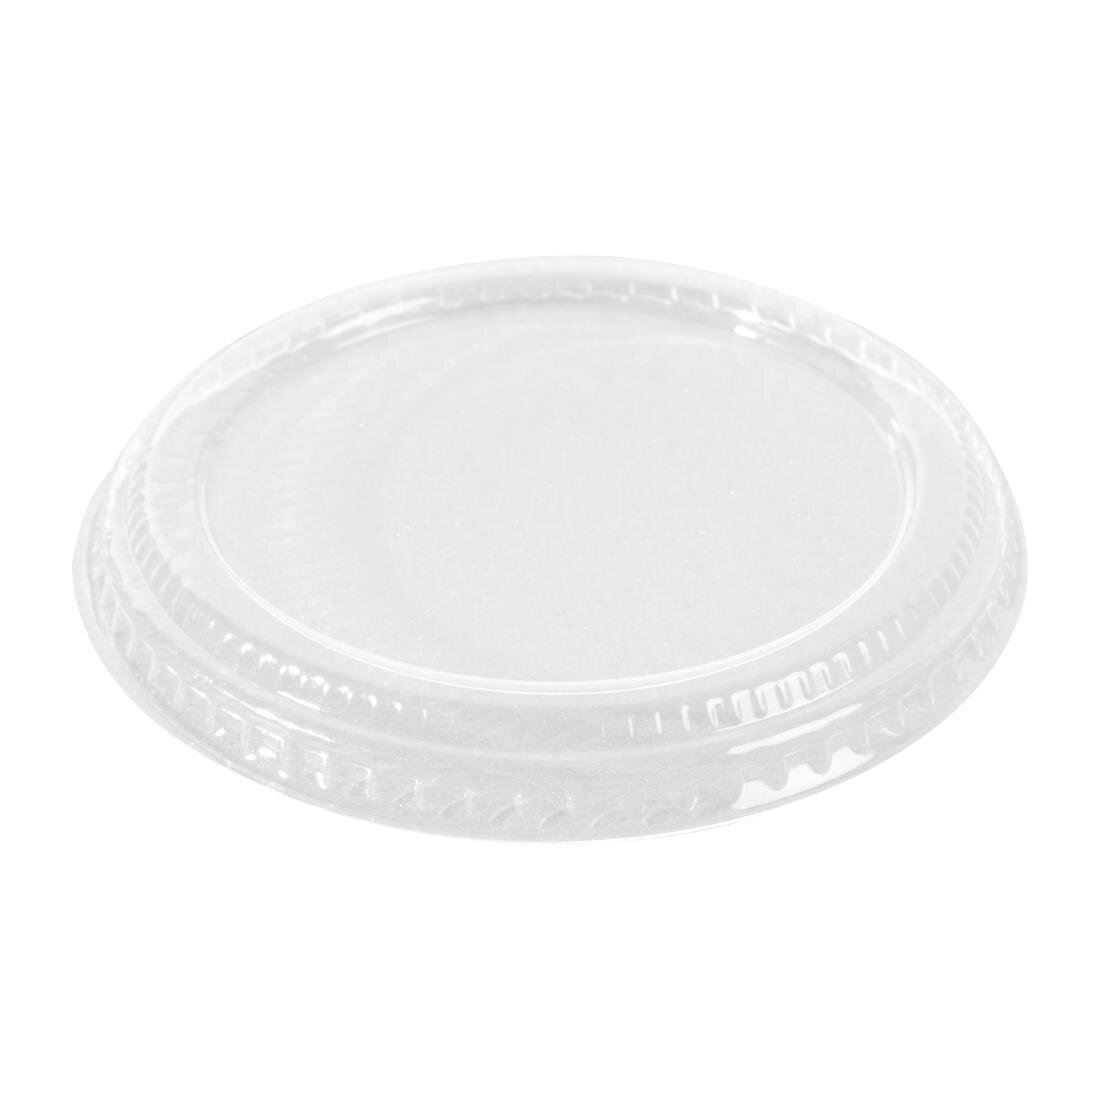 Solia PLA Lids for Round Container 180ml (Pack of 50)